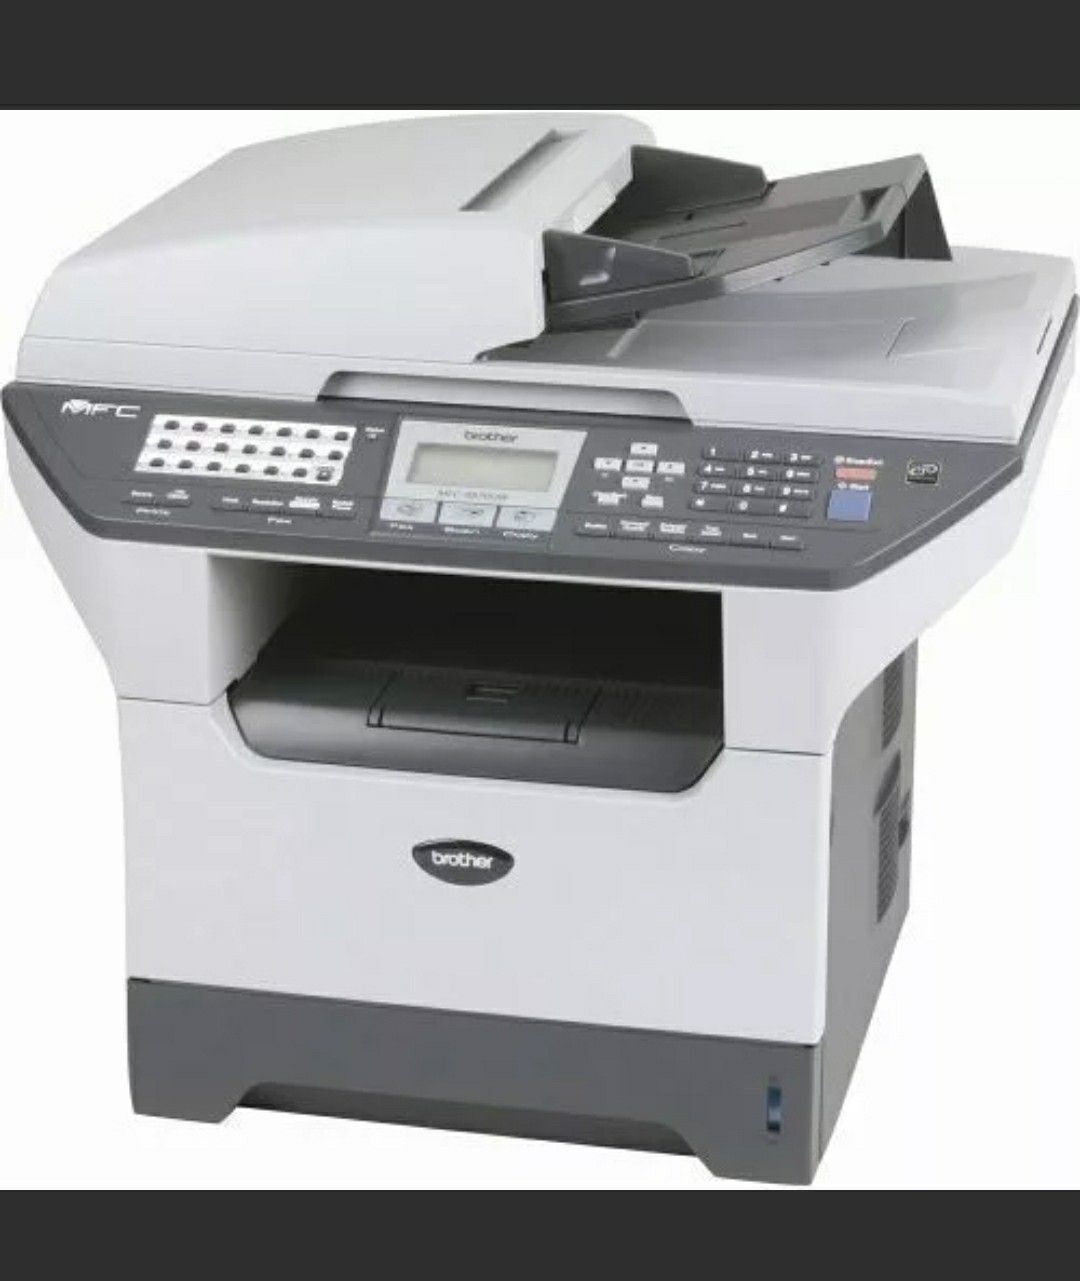 Brother MFC-8660DN Fax/Copy/Print All-In-One *Manual Included* ￼